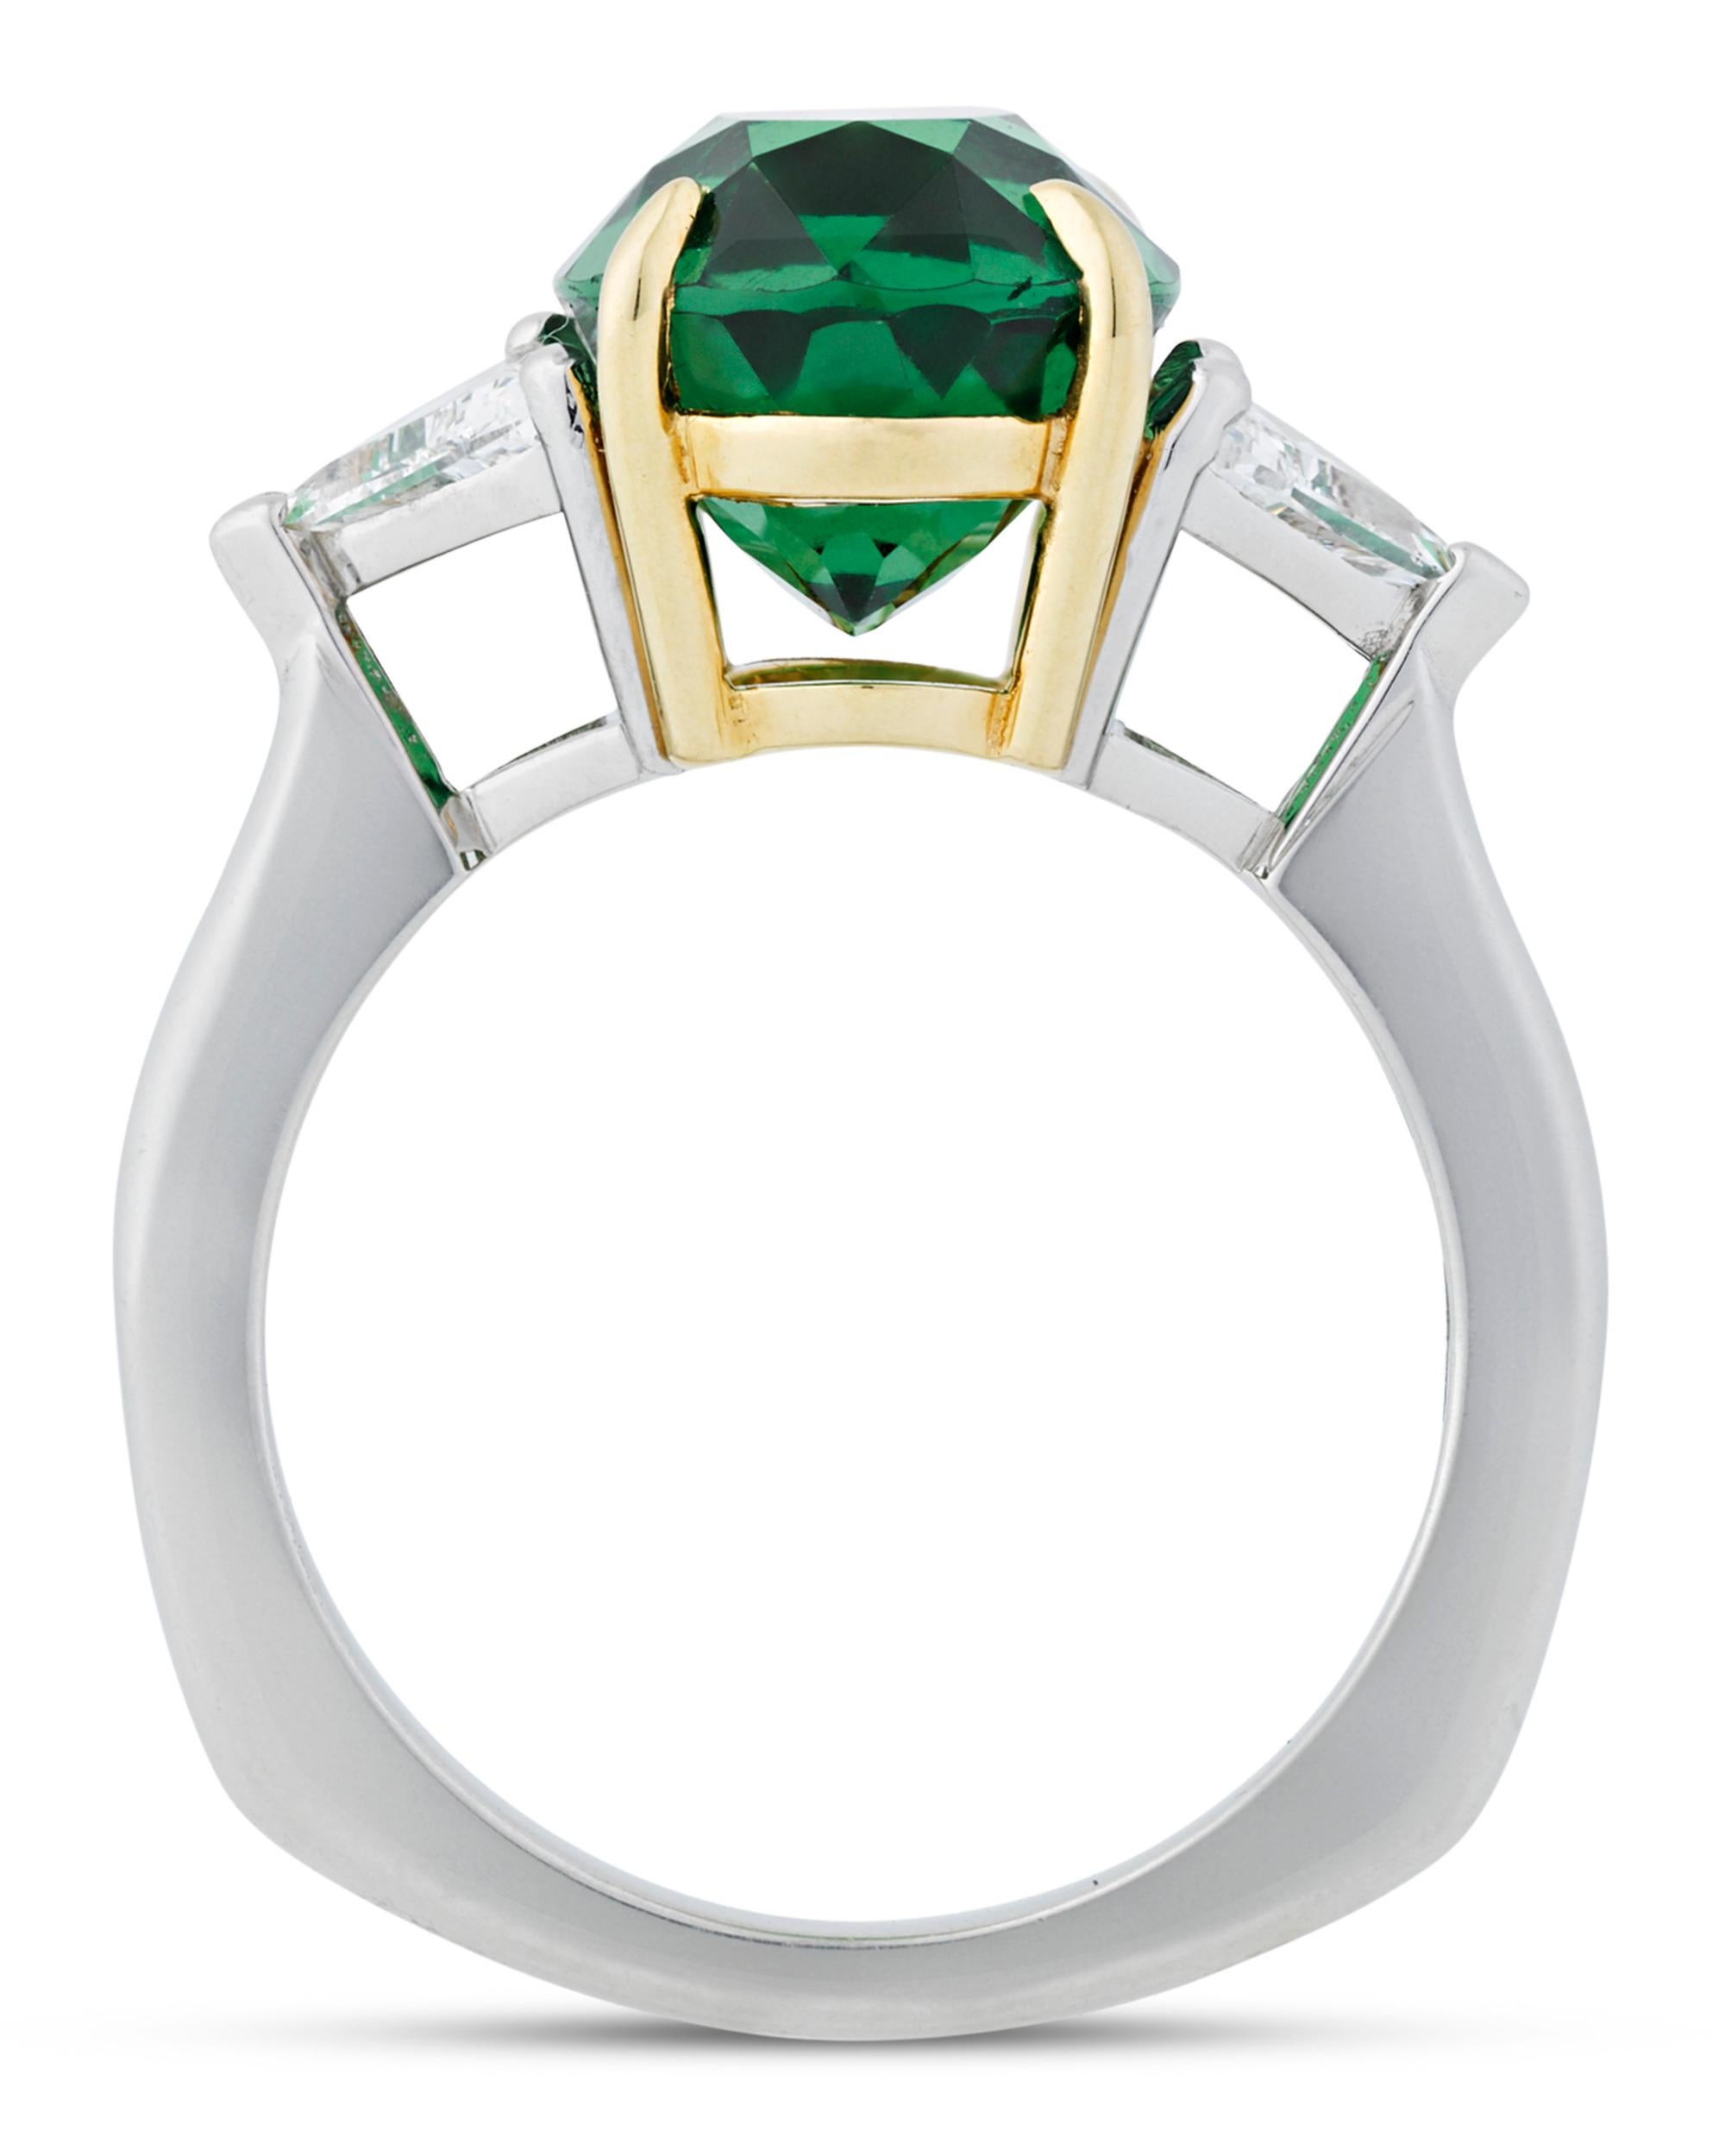 Prized for its rarity, luminosity and durability, the tsavorite garnet is truly a show-stopper of a gemstone. Weighing 6.26 carats, this jewel is among the best of its kind, exhibiting the perfect intense emerald green hue found only in the finest